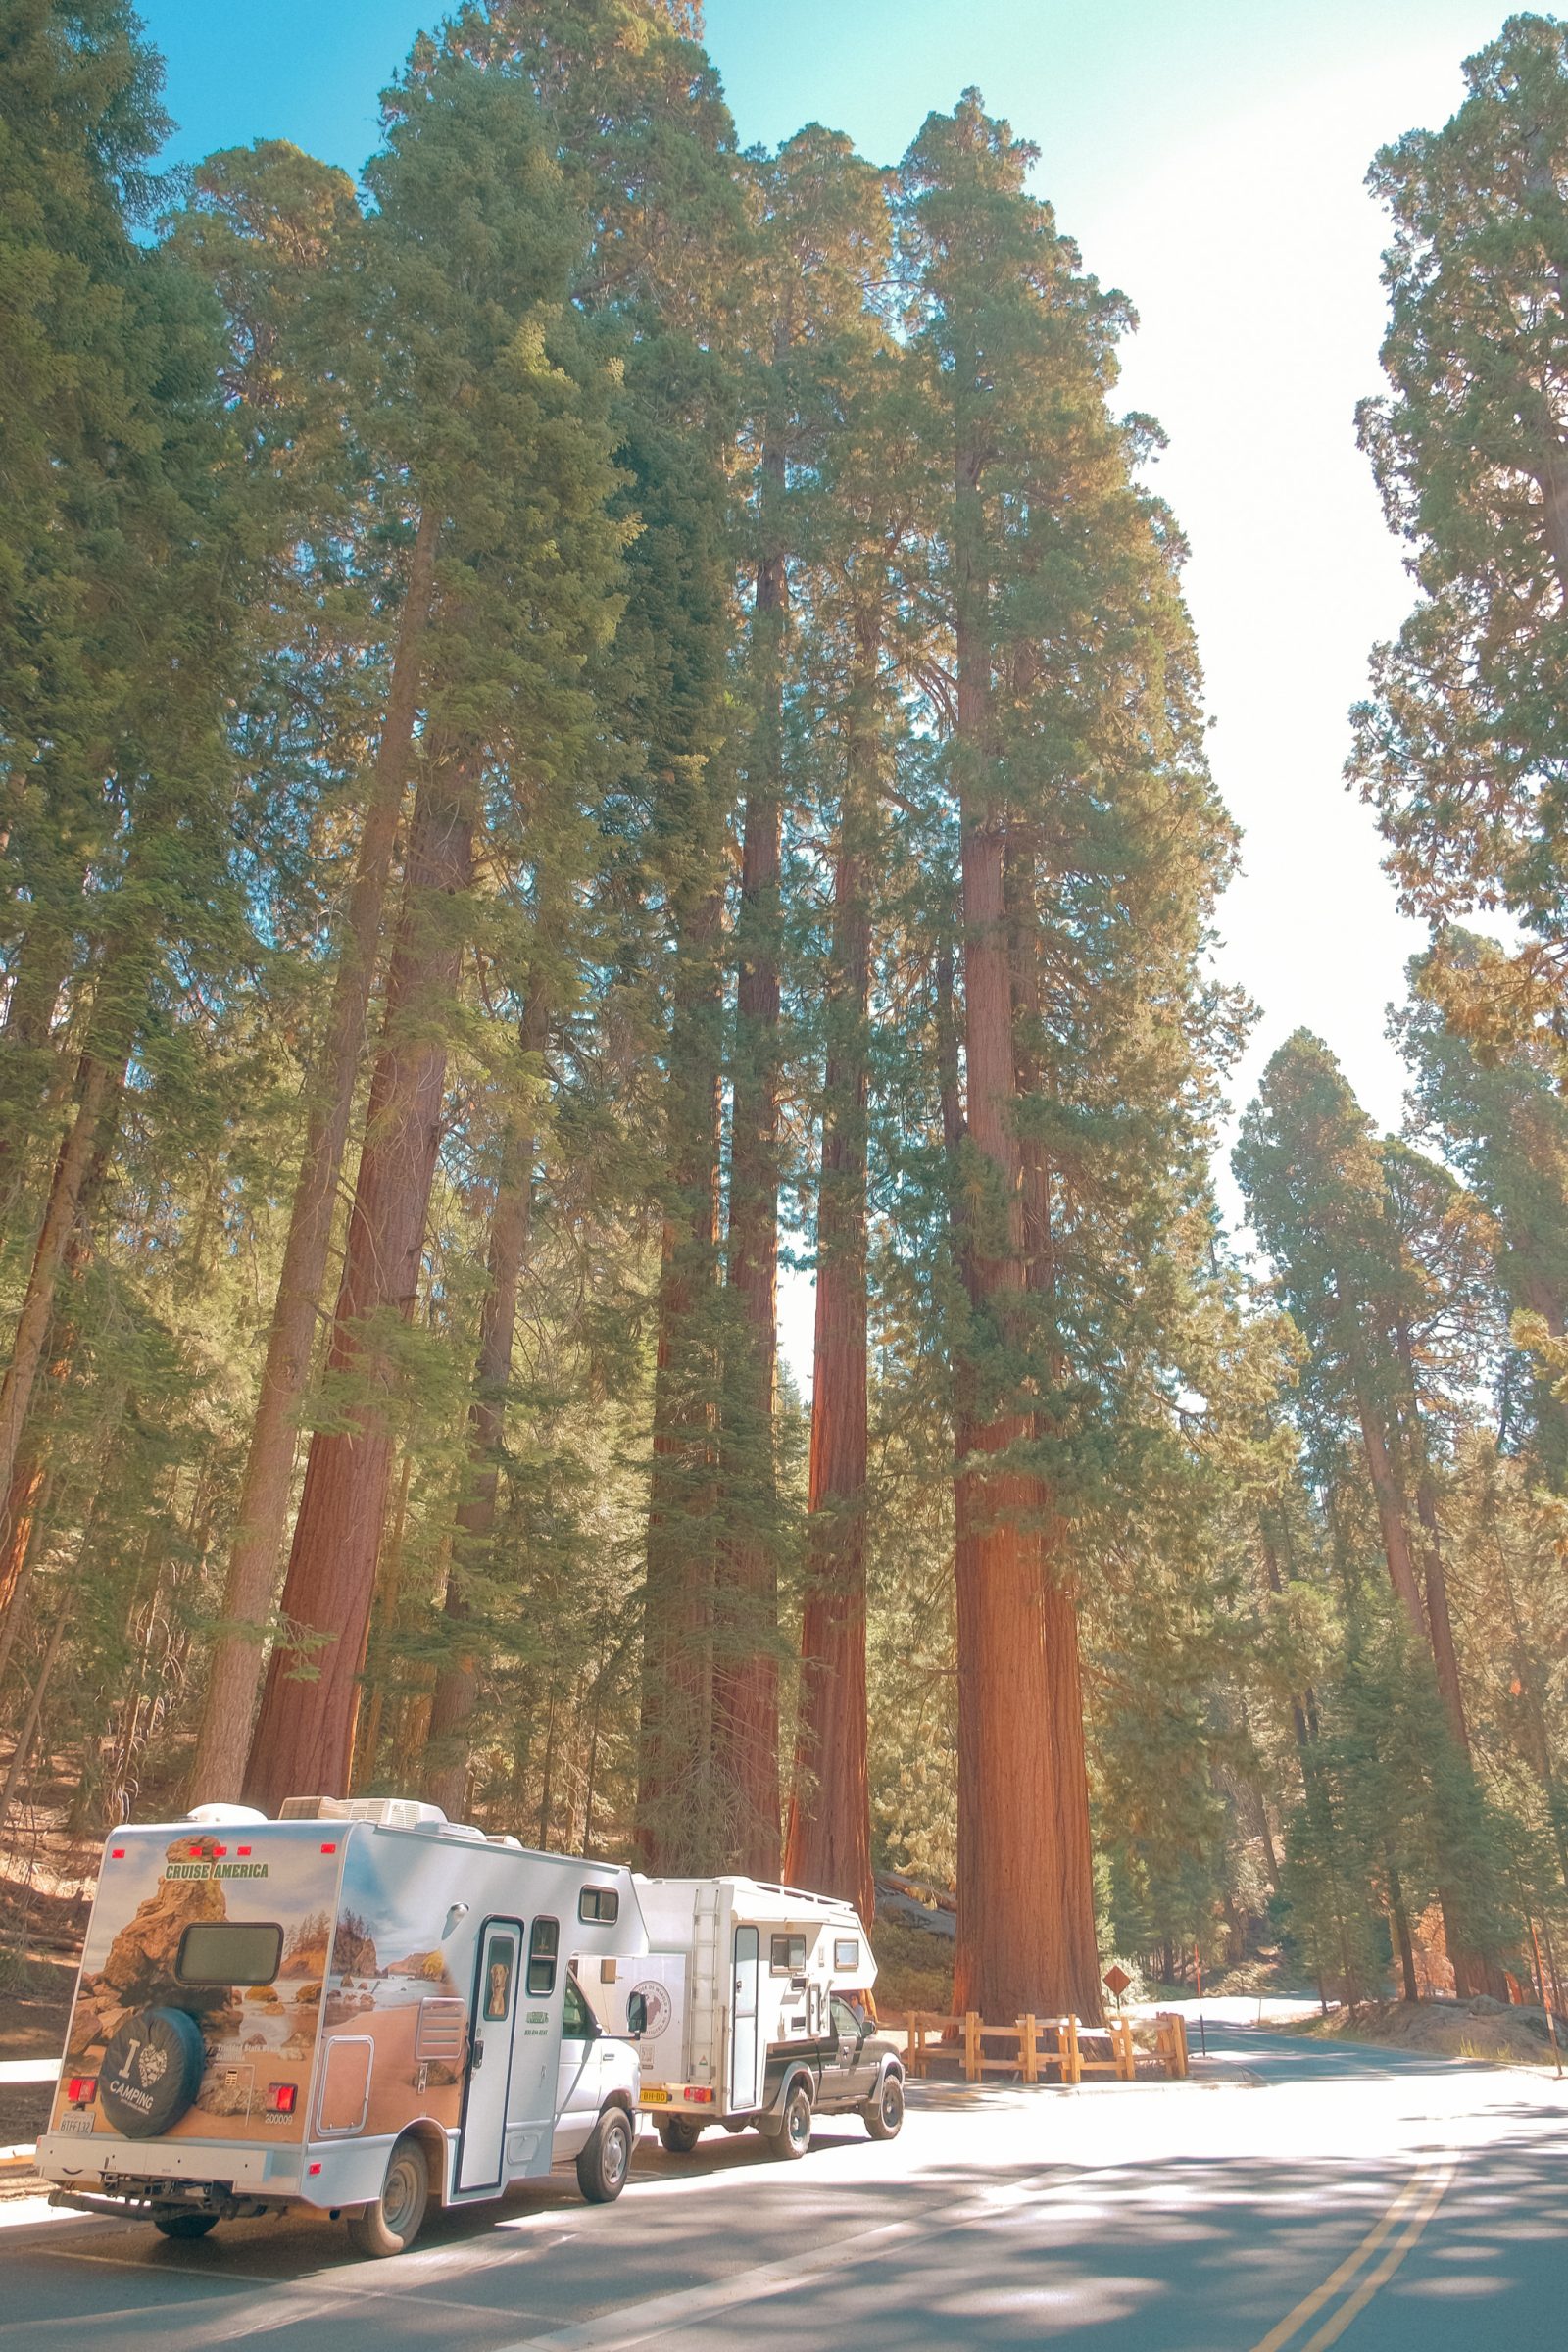 With the motorhomes | Tips for Sequoia National Park